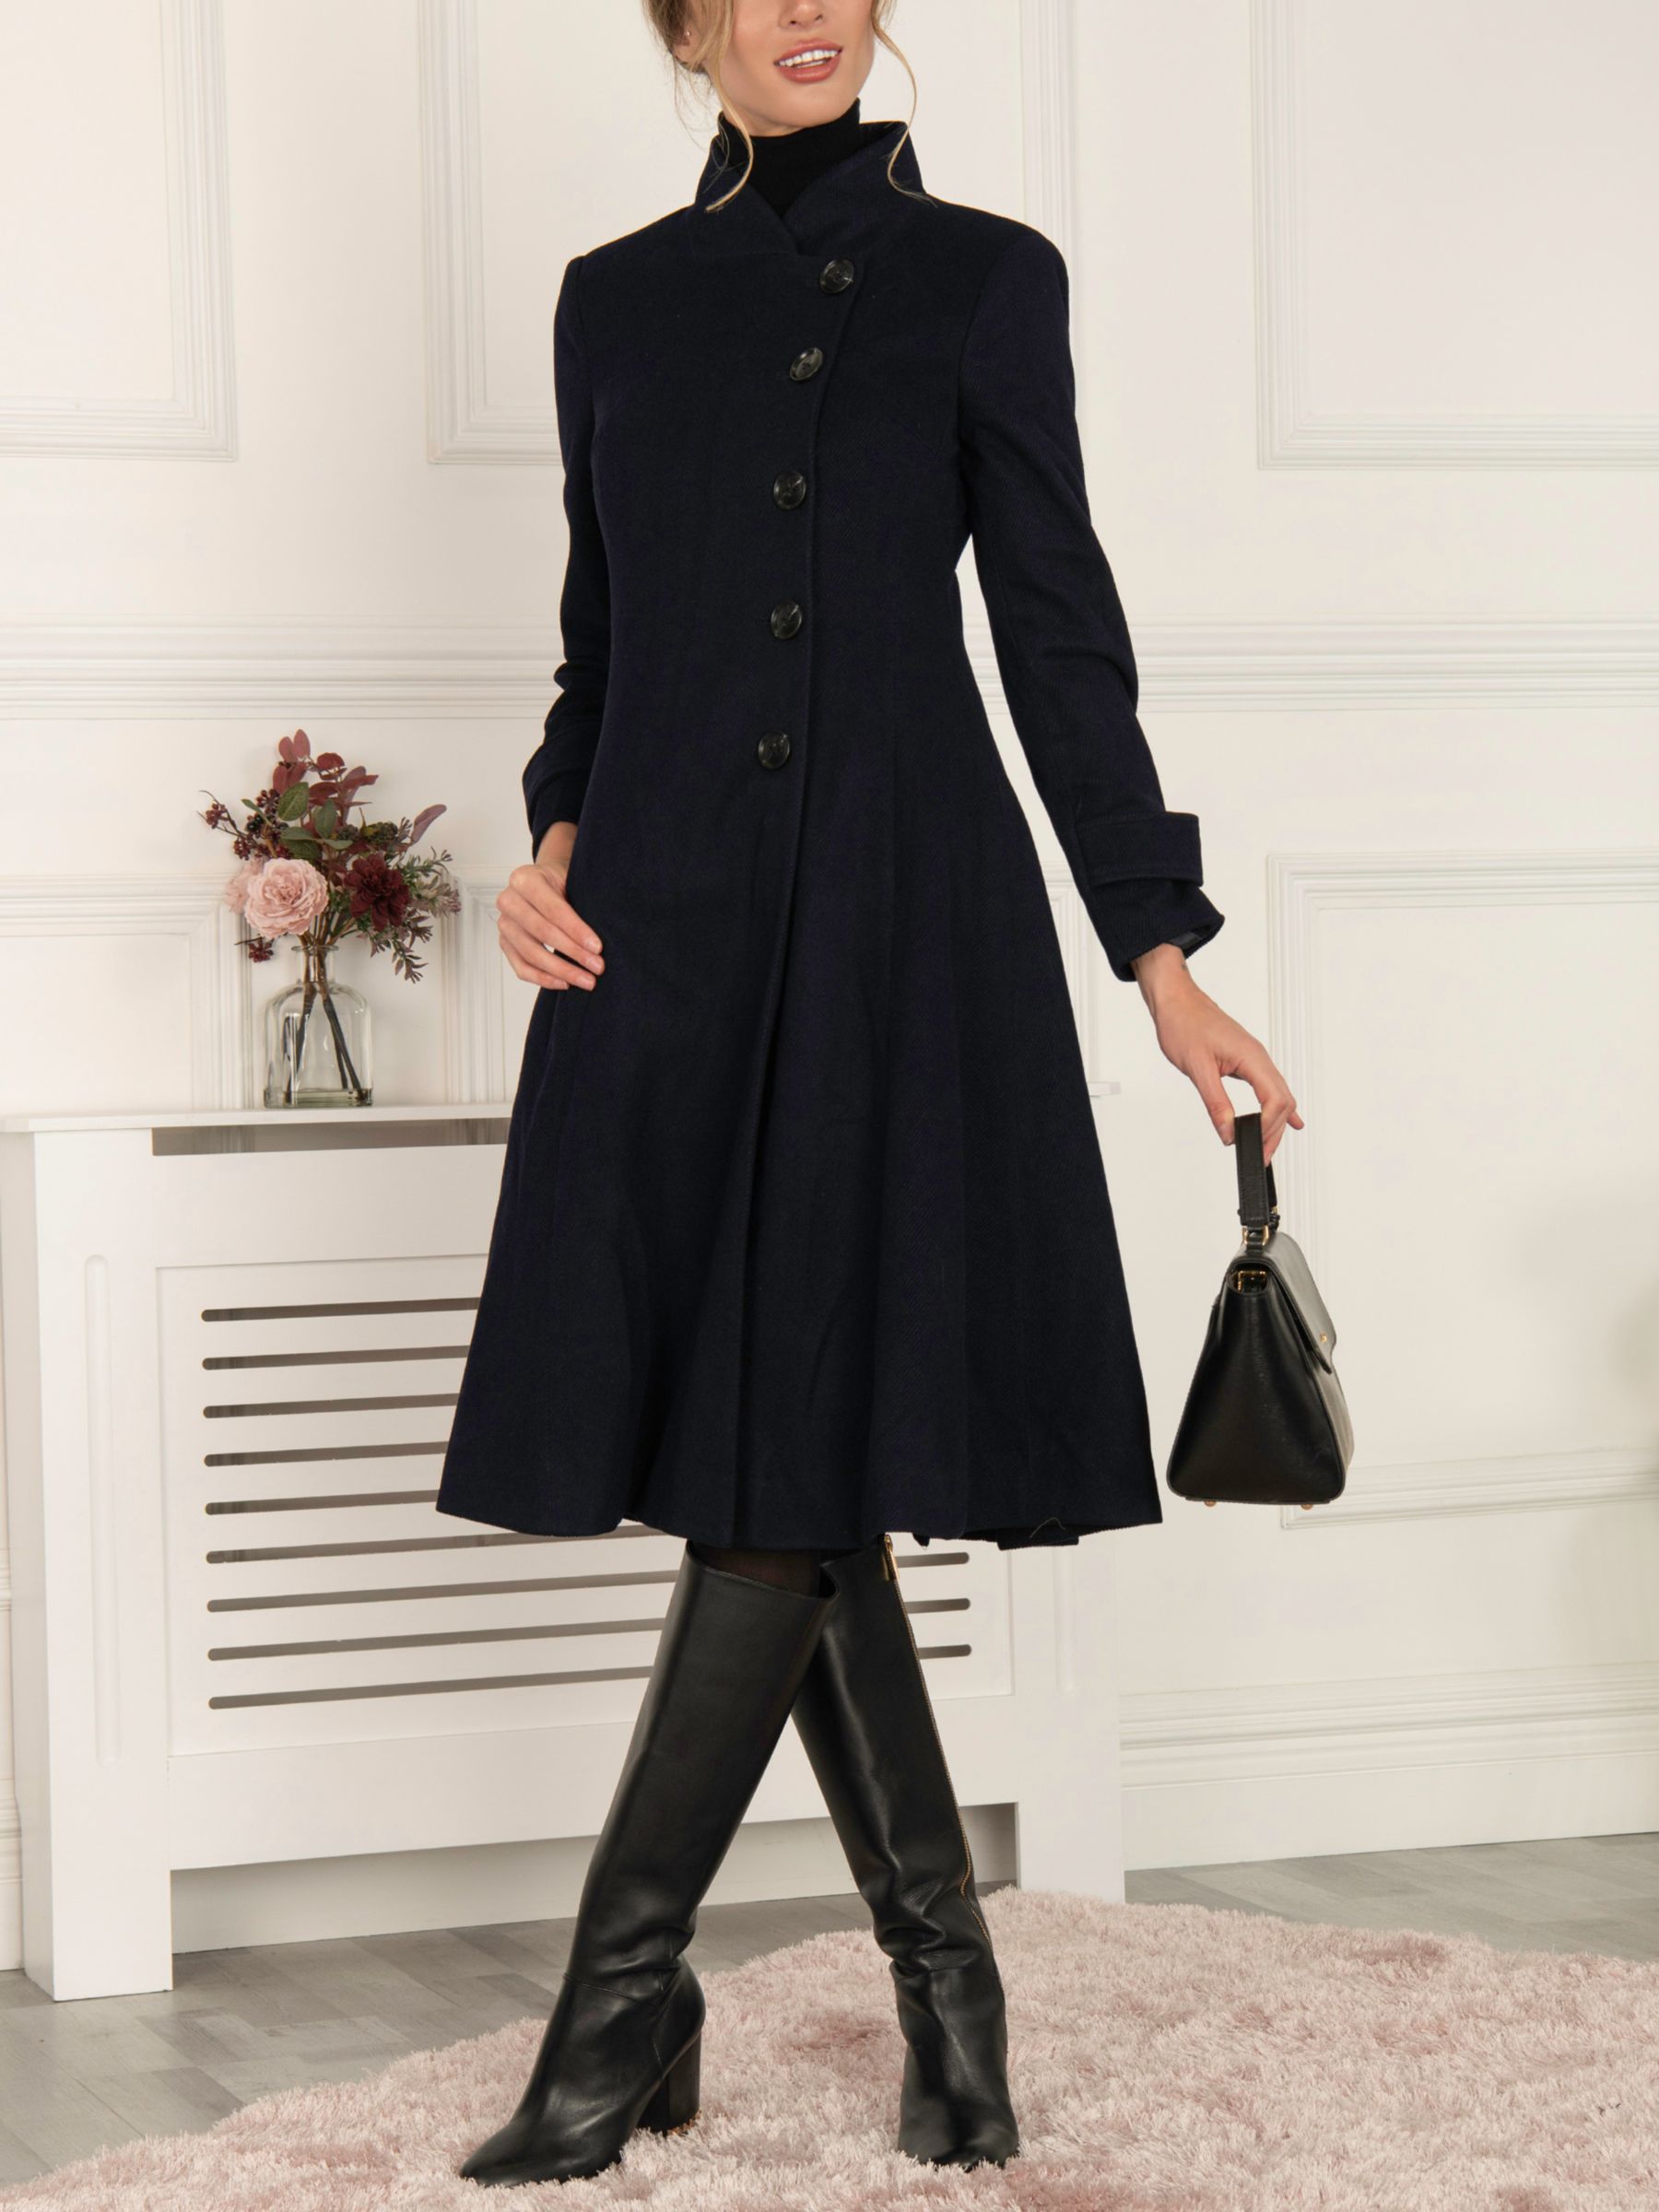 Navy Fit and Flare Coat, Wool Coat